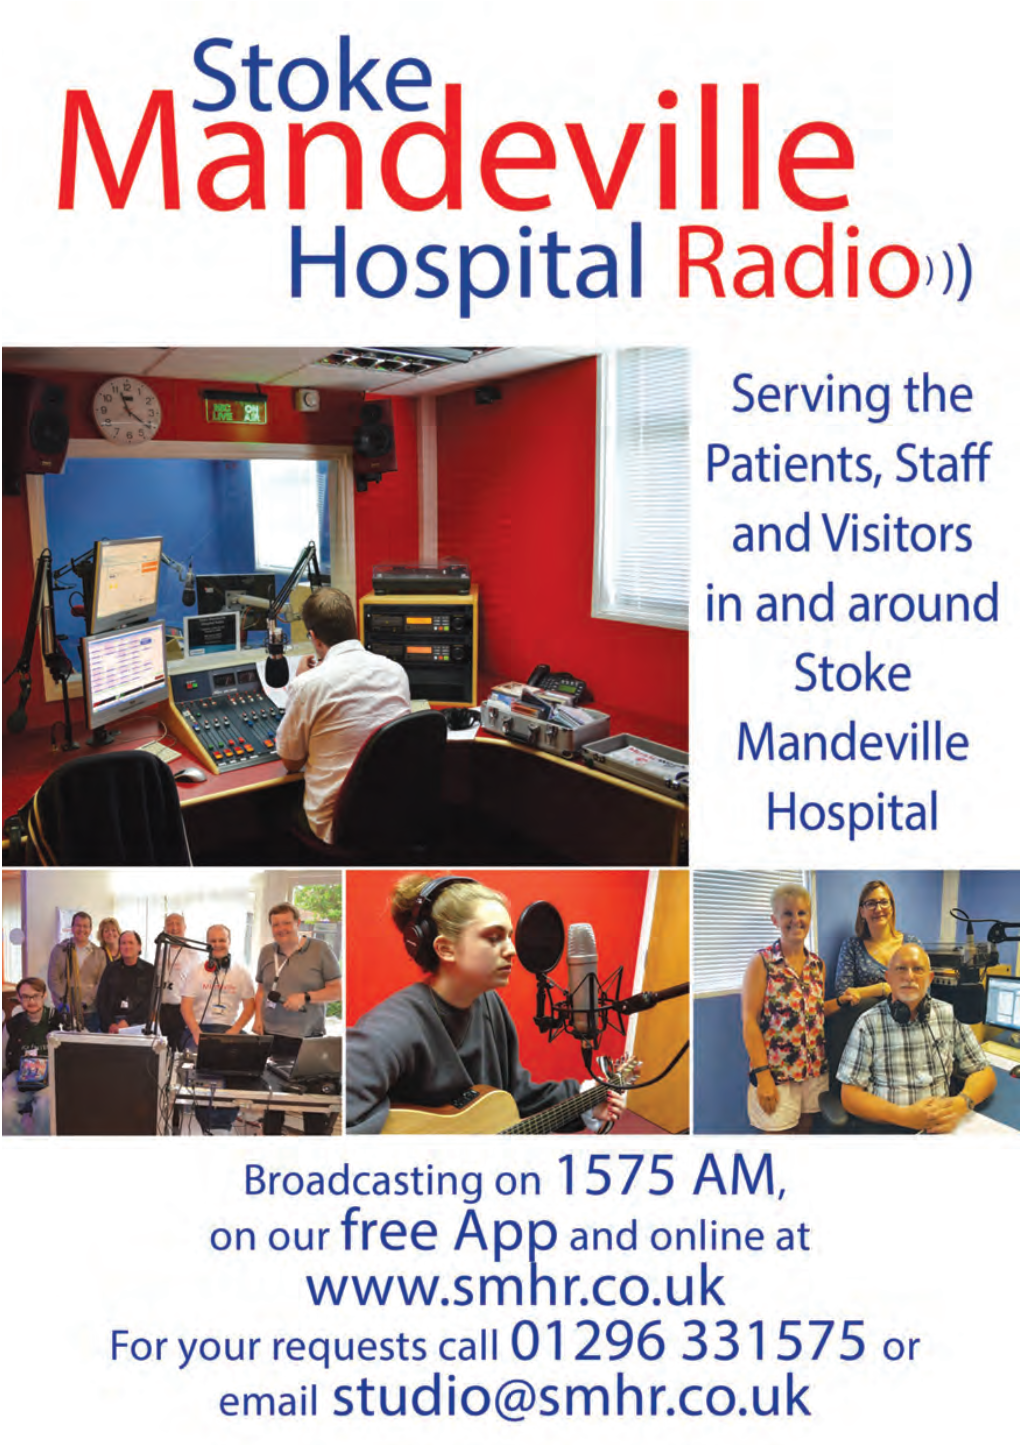 Stoke Mandeville Hospital Radio from the Chairman